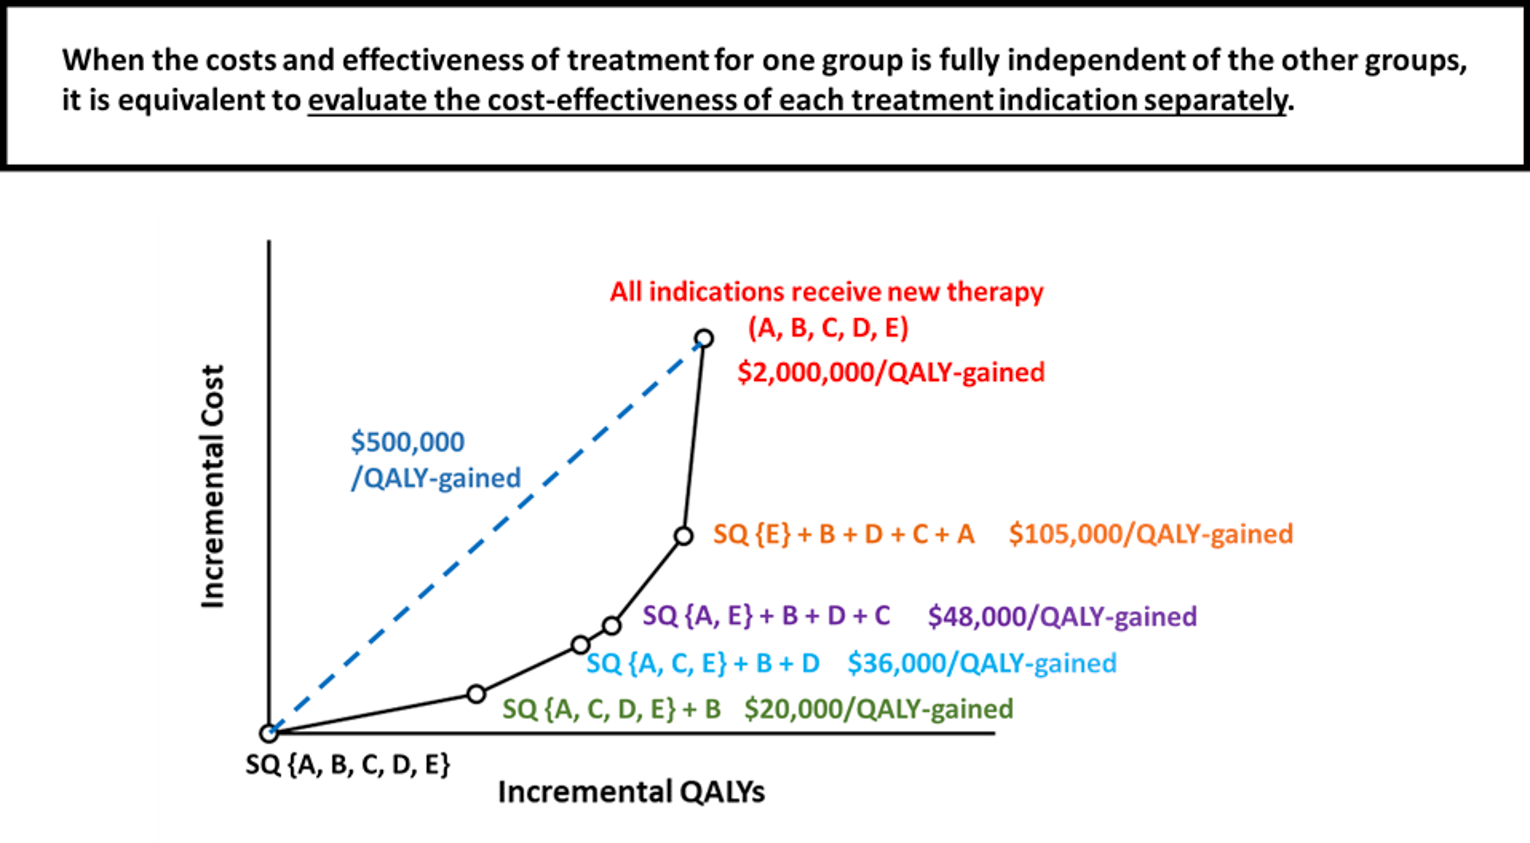 An incremental cost effectiveness graph with the x-axis describing incremental quality-adjusted life-years and the y-axis incremental costs, showing the impact of different therapies on incremental cost per quality-adjusted life years, from $20,000 to $2 million.